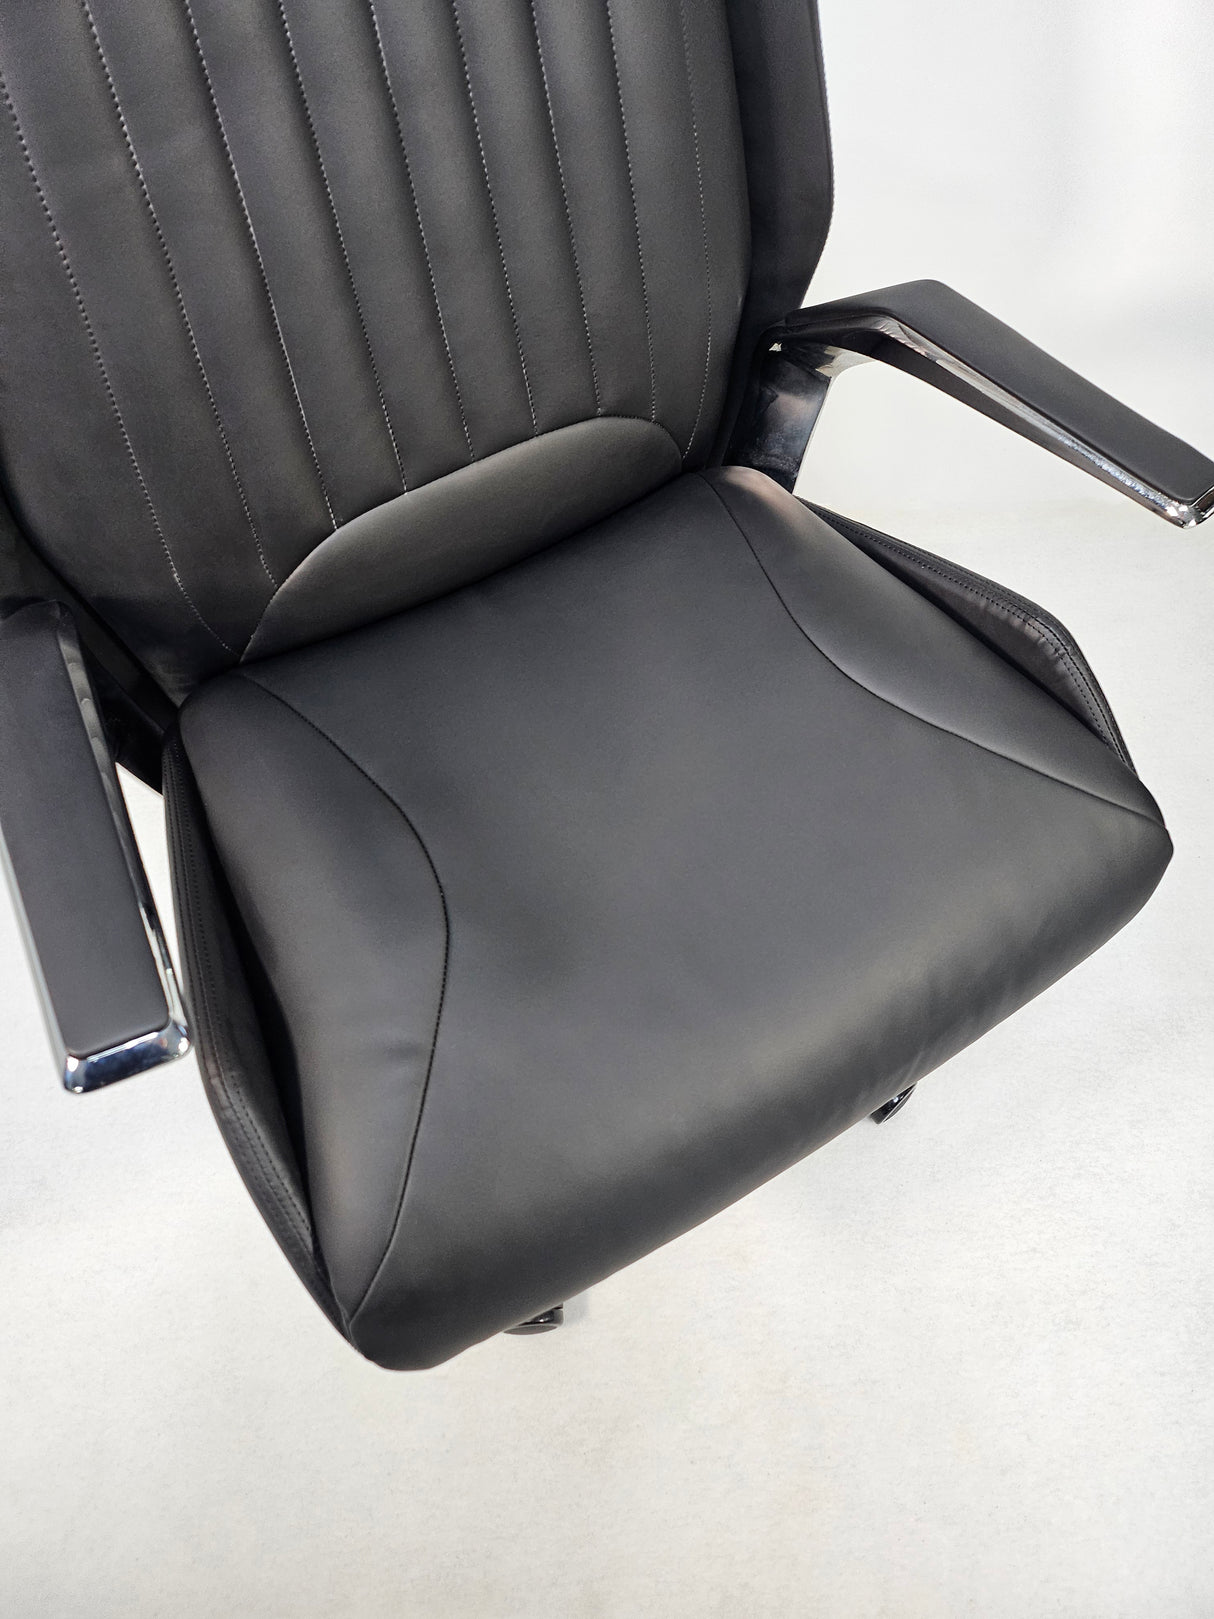 Quality Modern Heavy Duty Office Chair in Black Leather - DT-8530